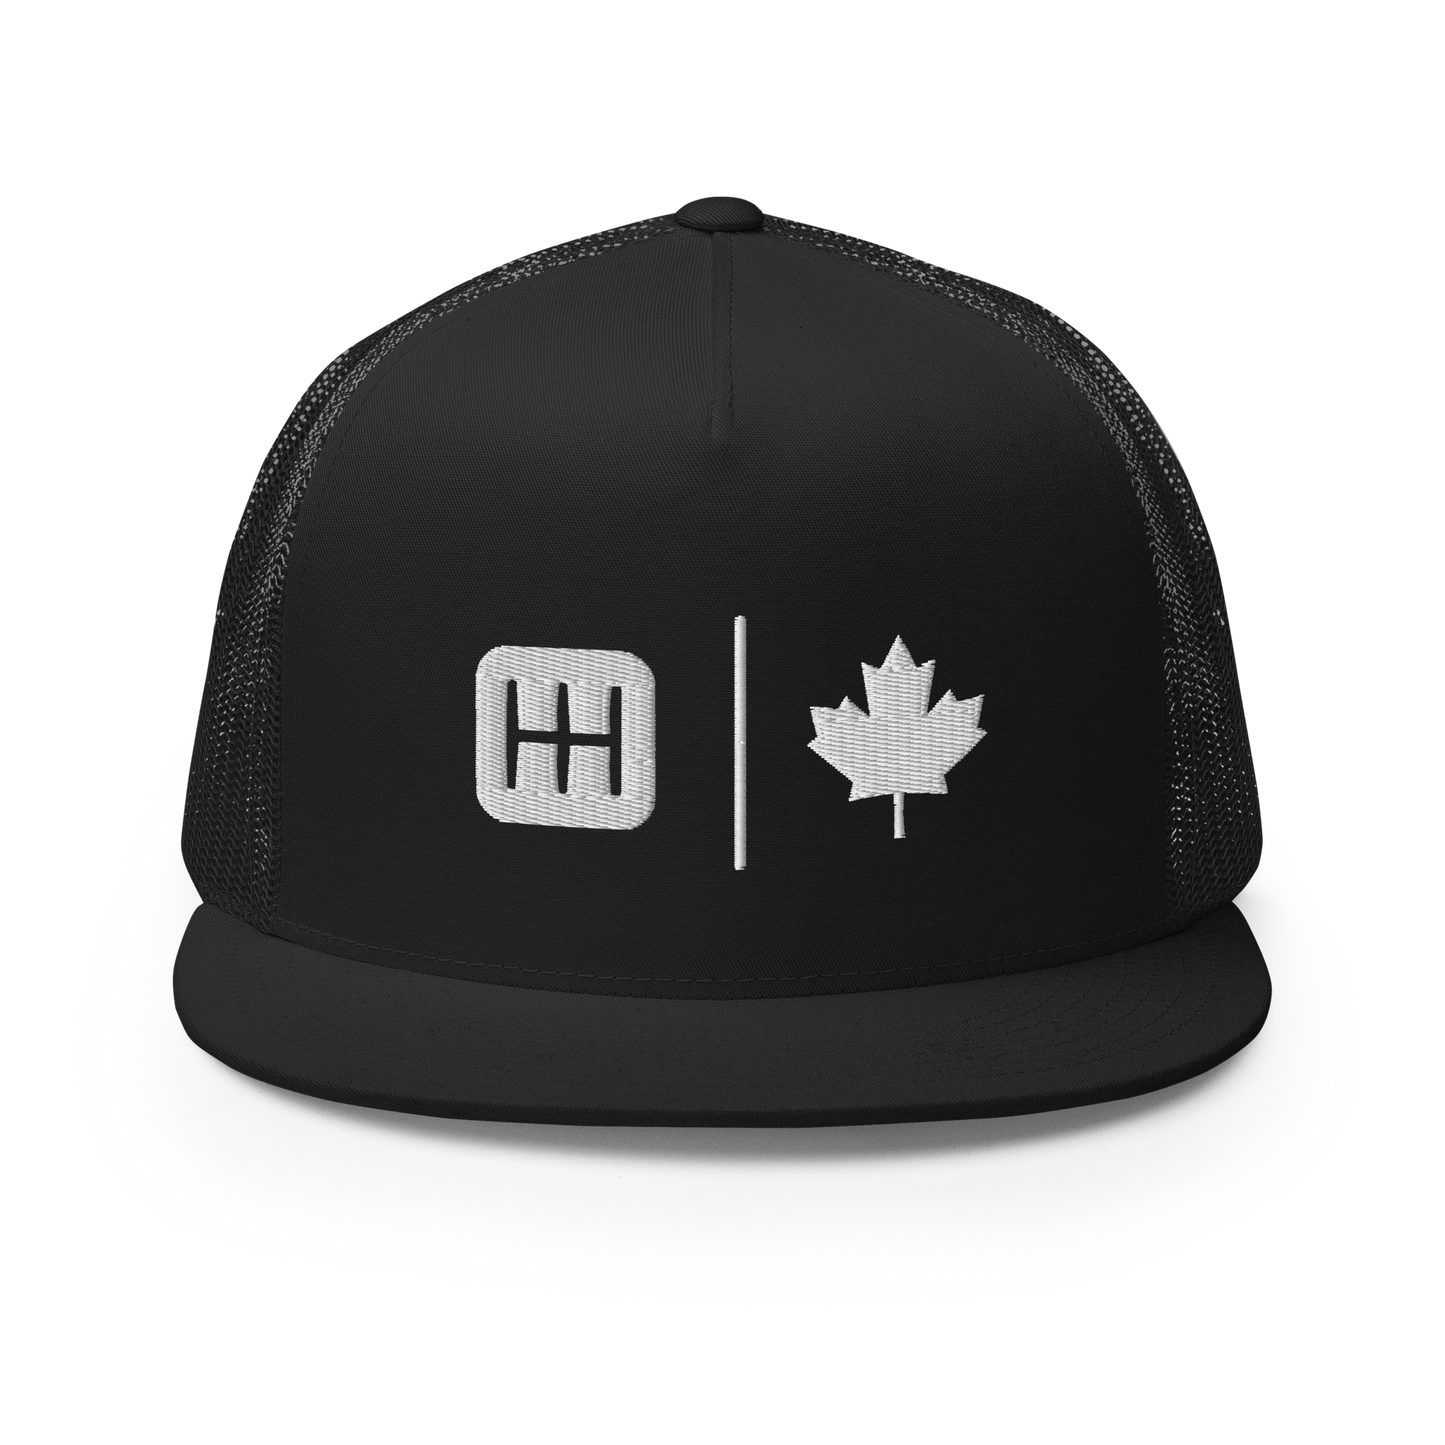 CNTR Team Canada Collection | Flat Trucker Hat